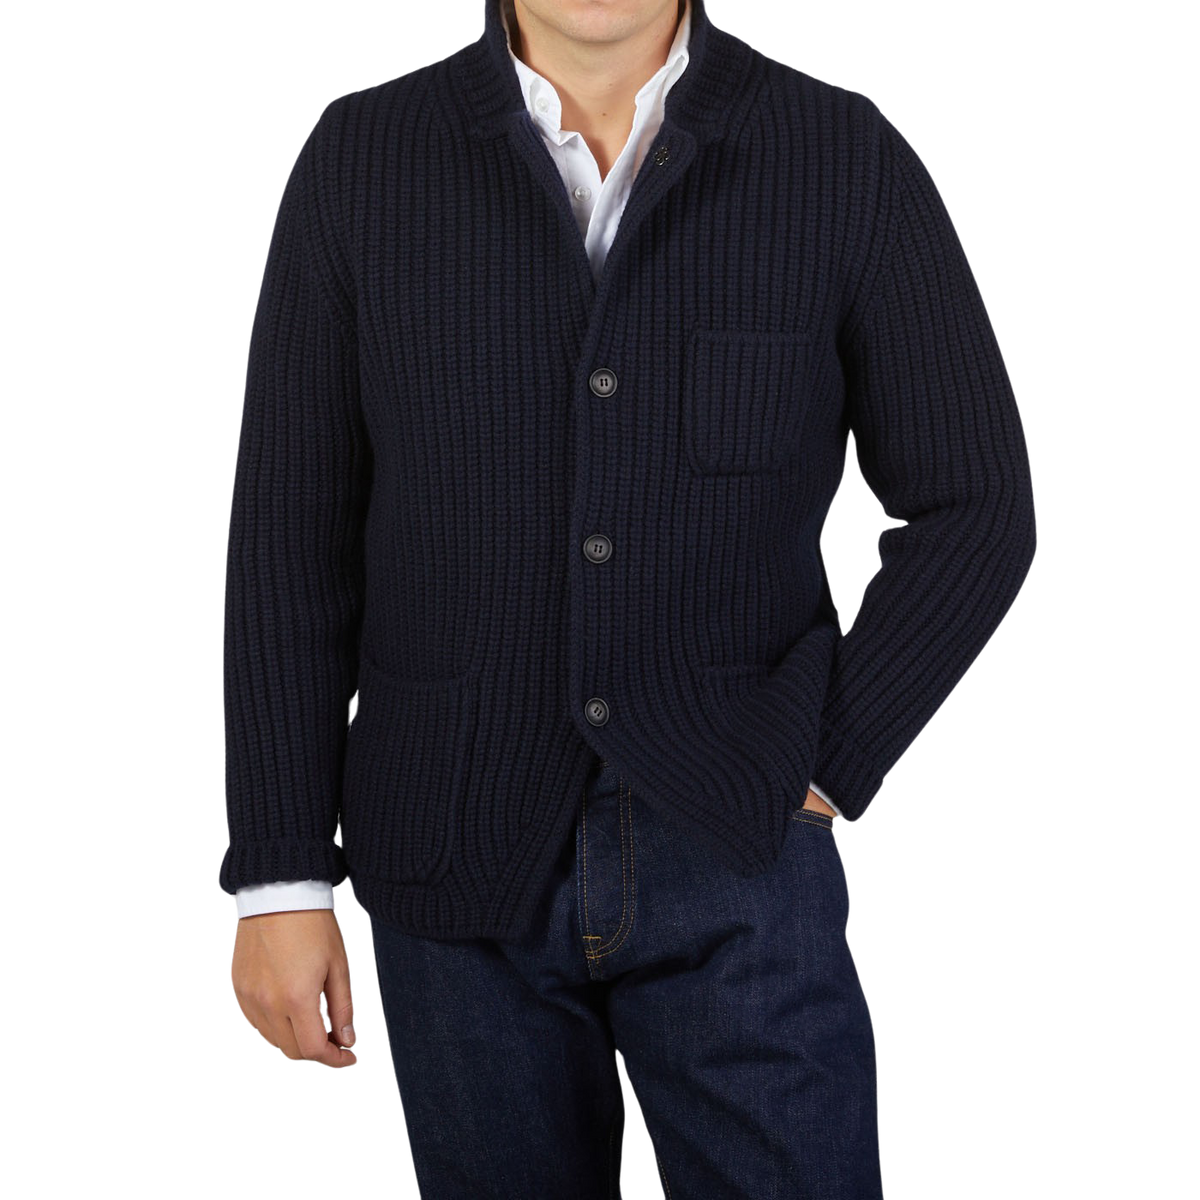 A man wearing Gran Sasso's Navy Blue Chunky Knitted Wool Cardigan from their Sartorial program.